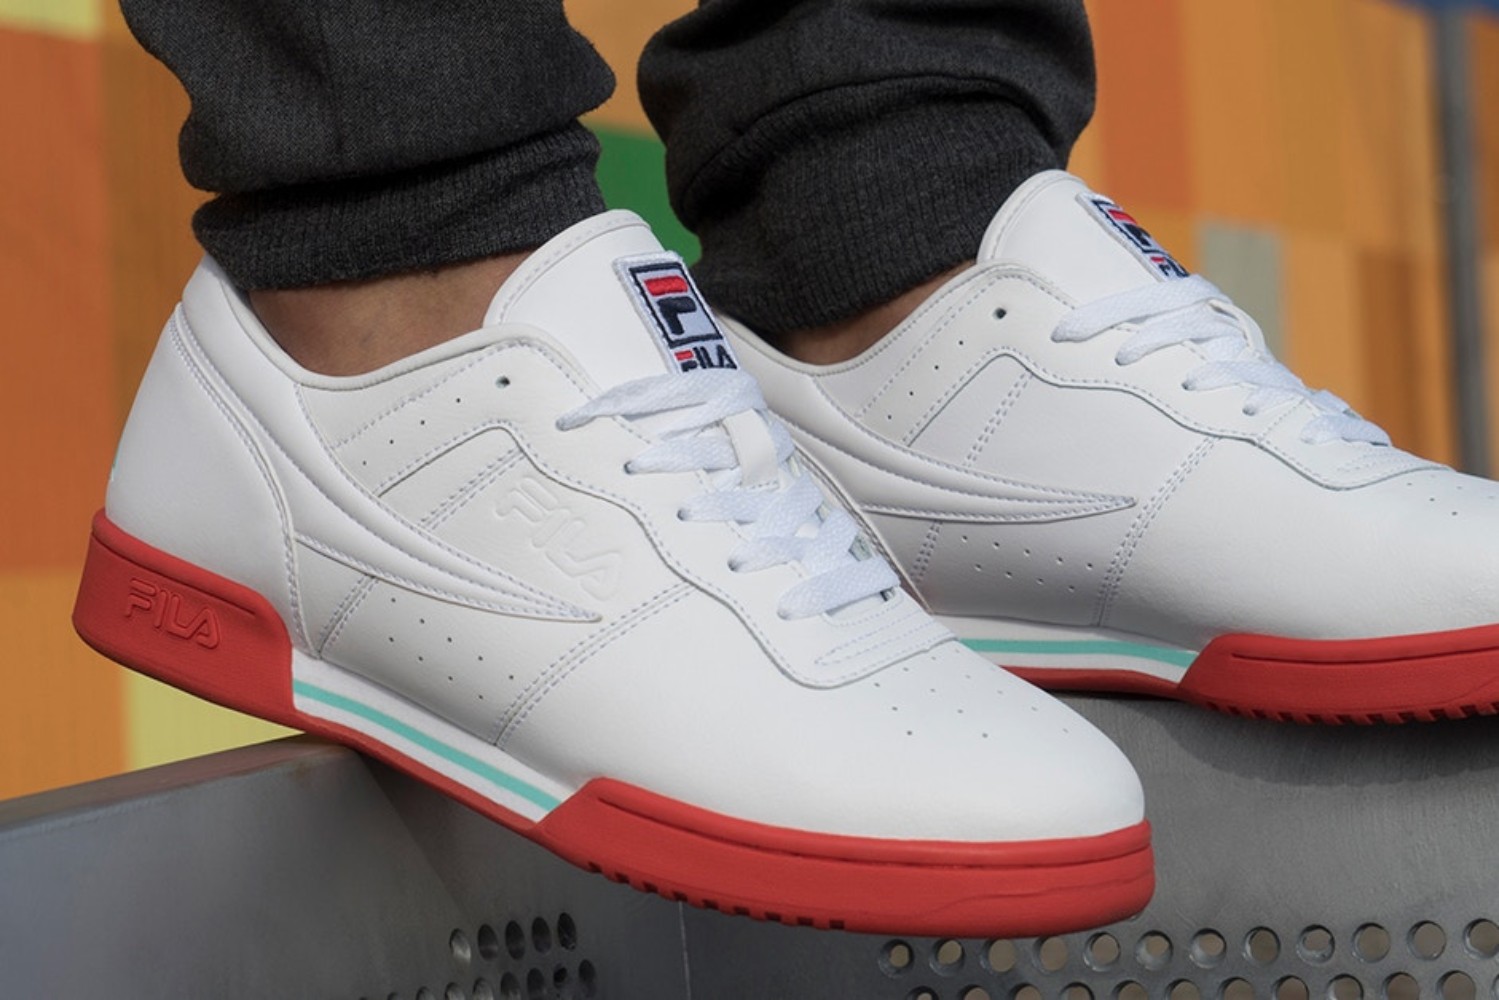 FILA to release “Colors” Pack Paying Tribute to their Glory Days